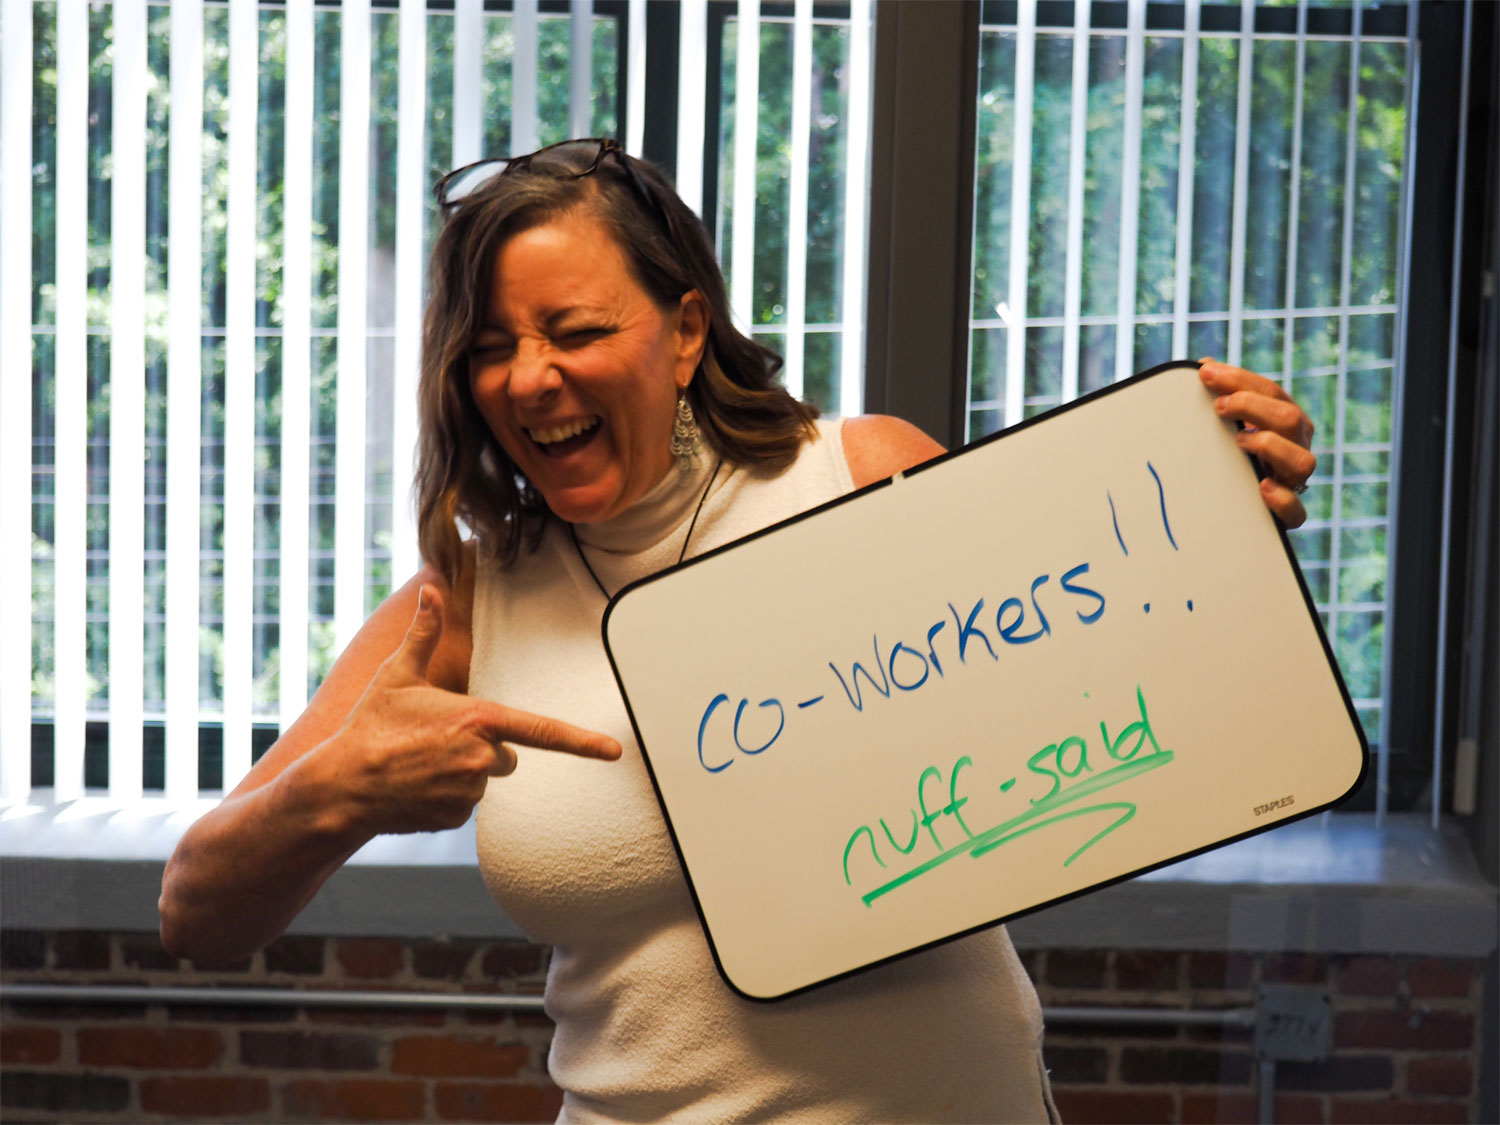 We asked Nancy Poulin, Account Manager to write down why she liked working at Clark (a bit of a guiding question). Her co-workers were quite entertained by her answer. Nice one, Nancy!